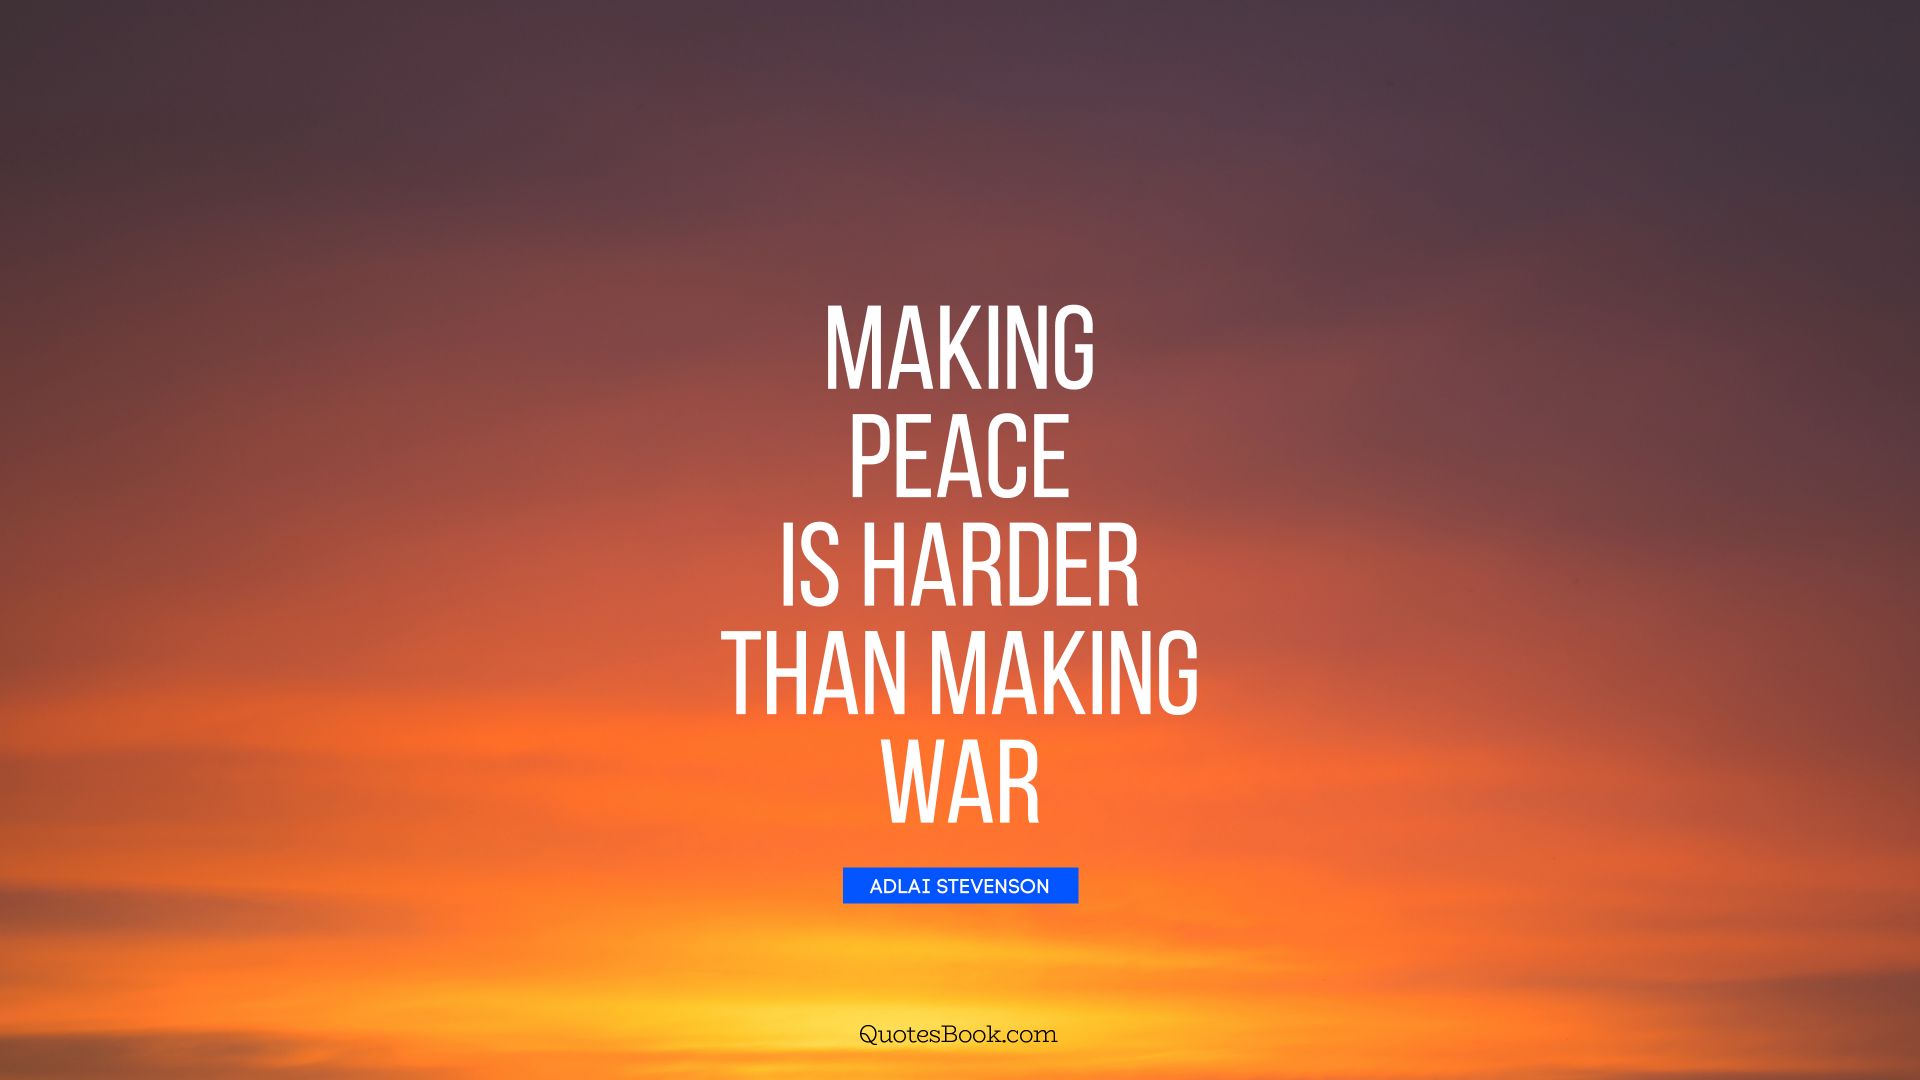 Making peace is harder than making war. - Quote by Adlai Stevenson